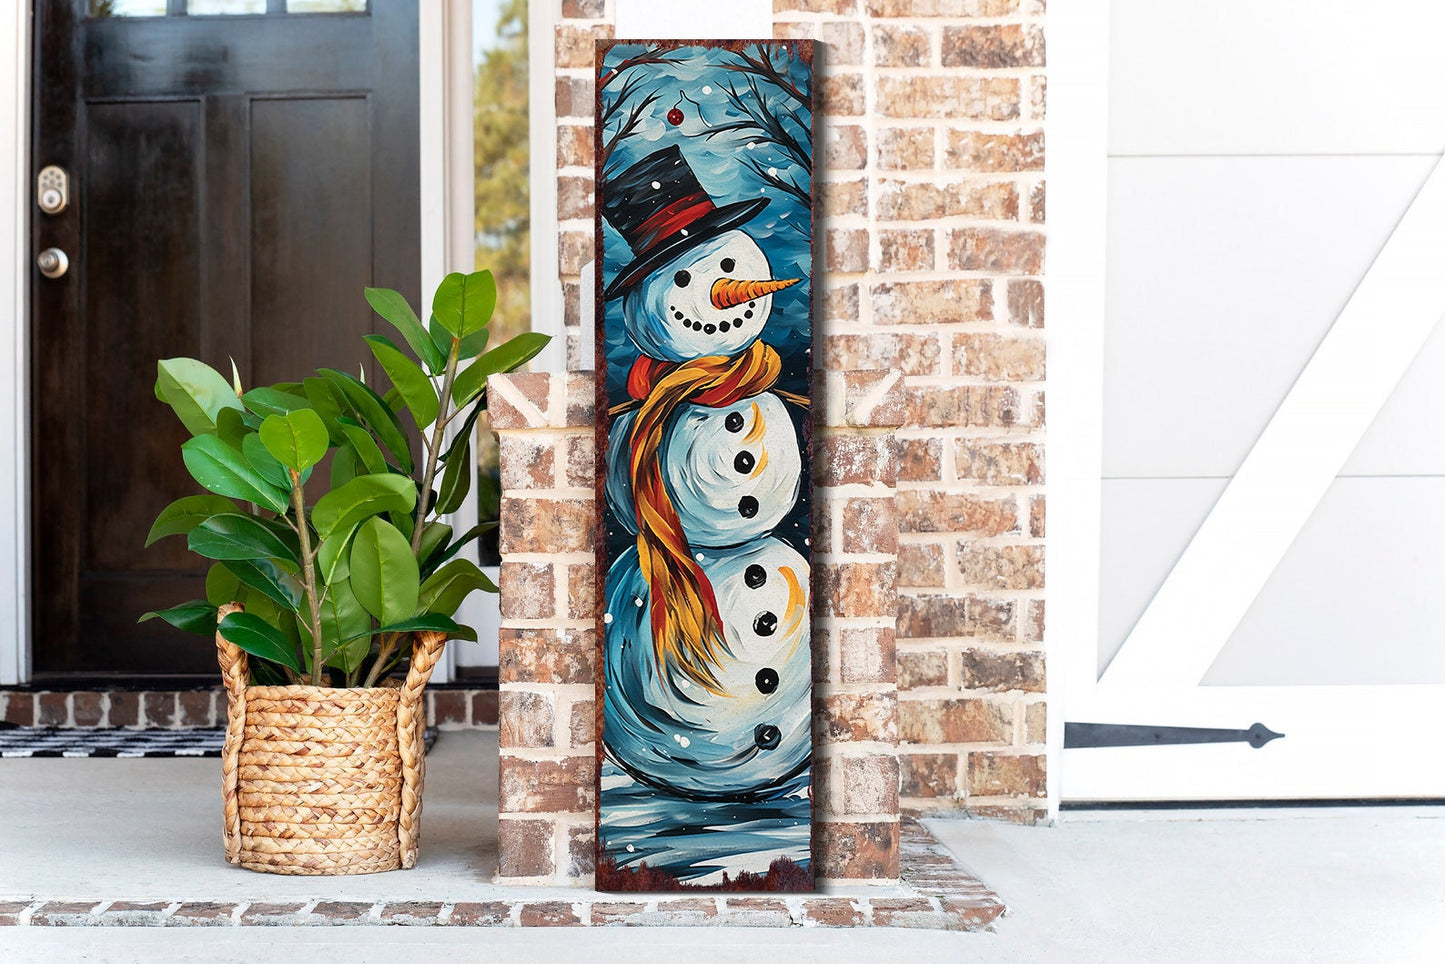 Vintage Christmas Decor for Outdoor - Whimsical 36in Snowman Merry Christmas Porch Sign, Add Rustic Charm to Your Front Porch